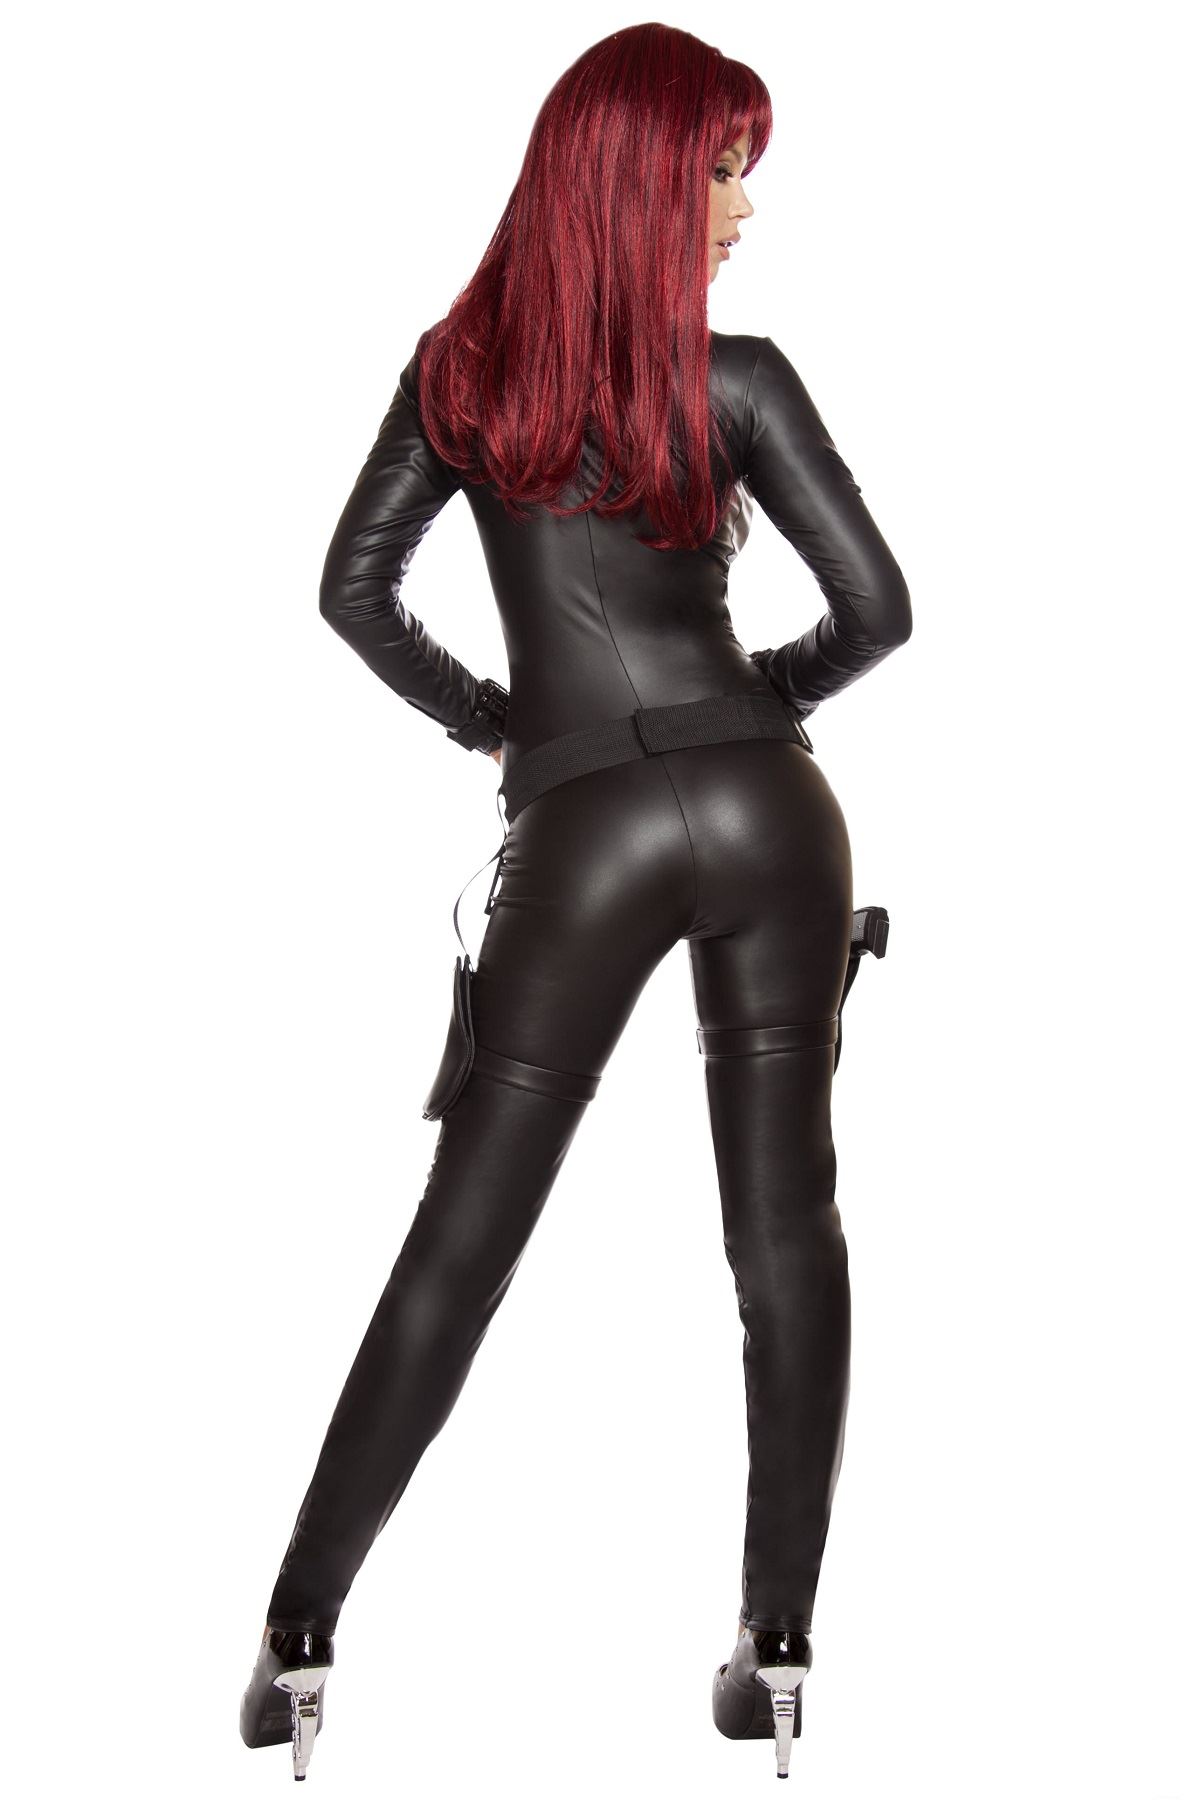 Adult Assassin Woman Deluxe Costume The Costume Land